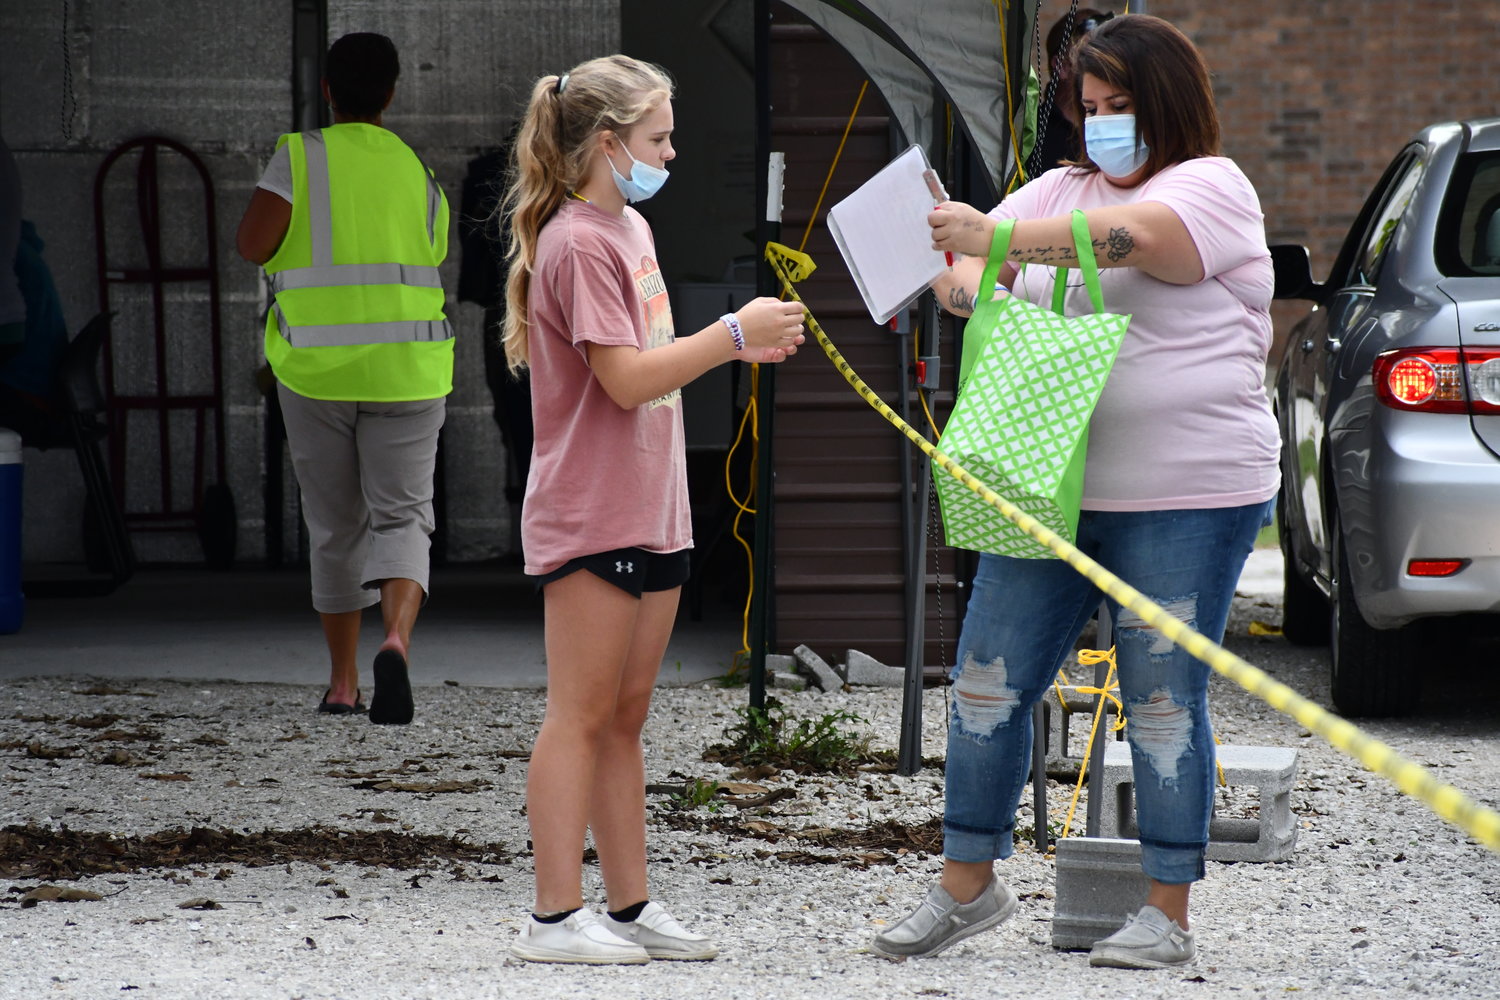 Payton Lister and Mellissa Cook get paperwork organized at the mass vaccination event.